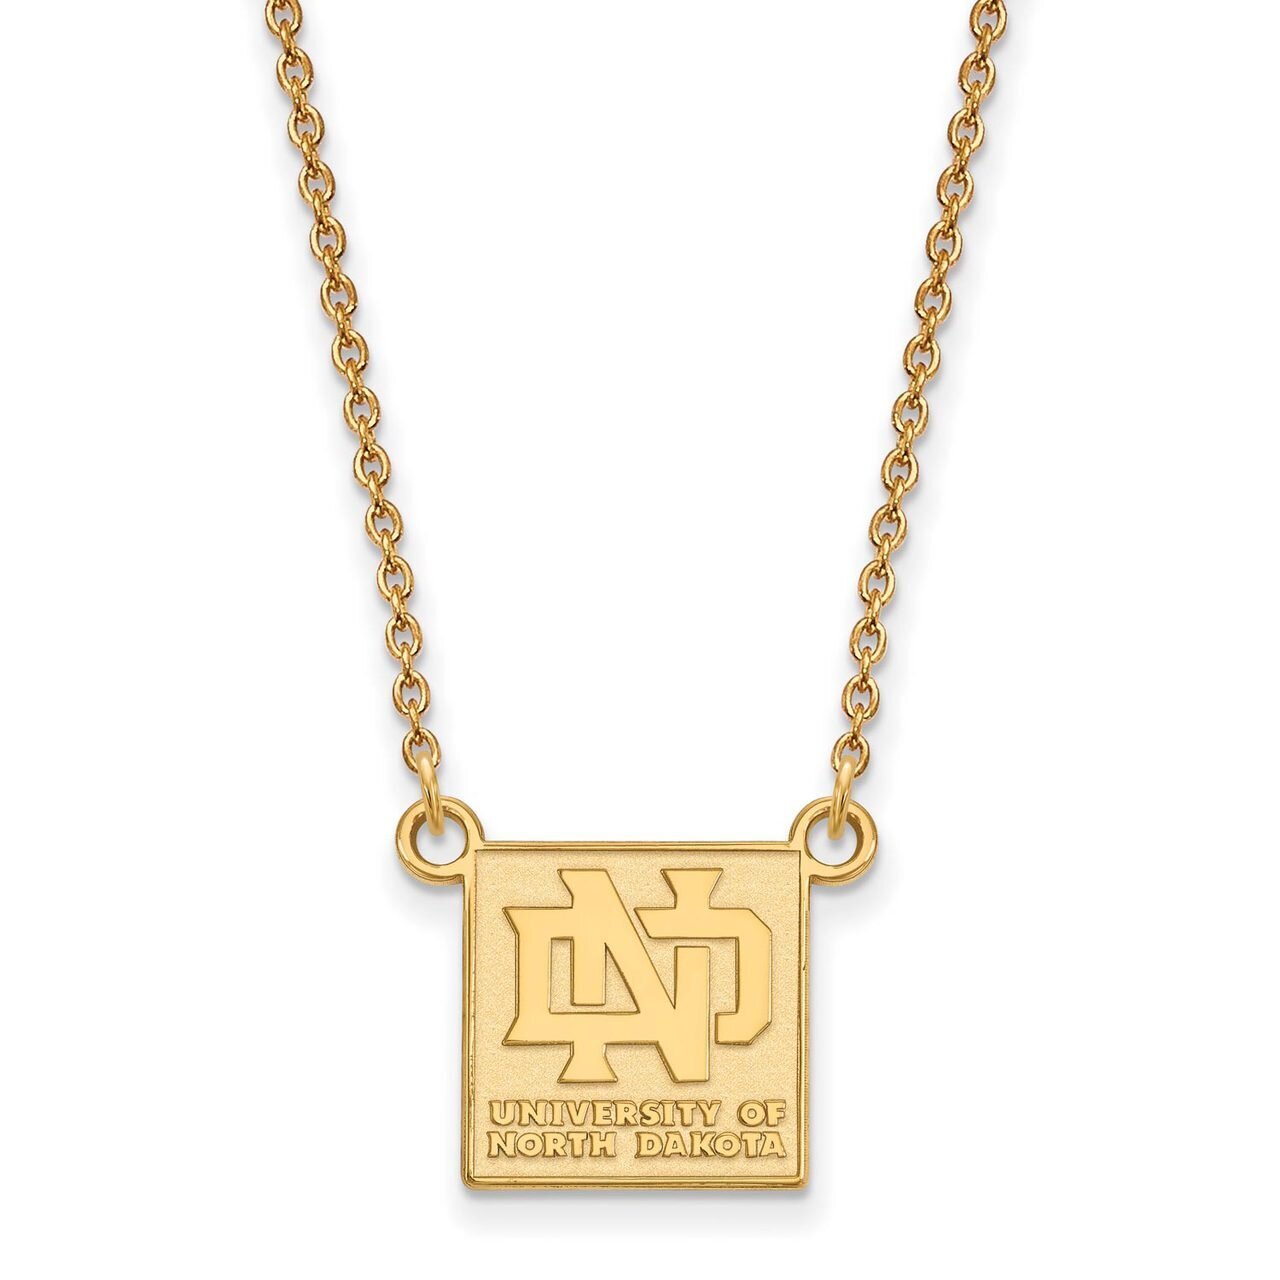 University of North Dakota Small Pendant with Chain Necklace 14k Yellow Gold 4Y009UNOD-18